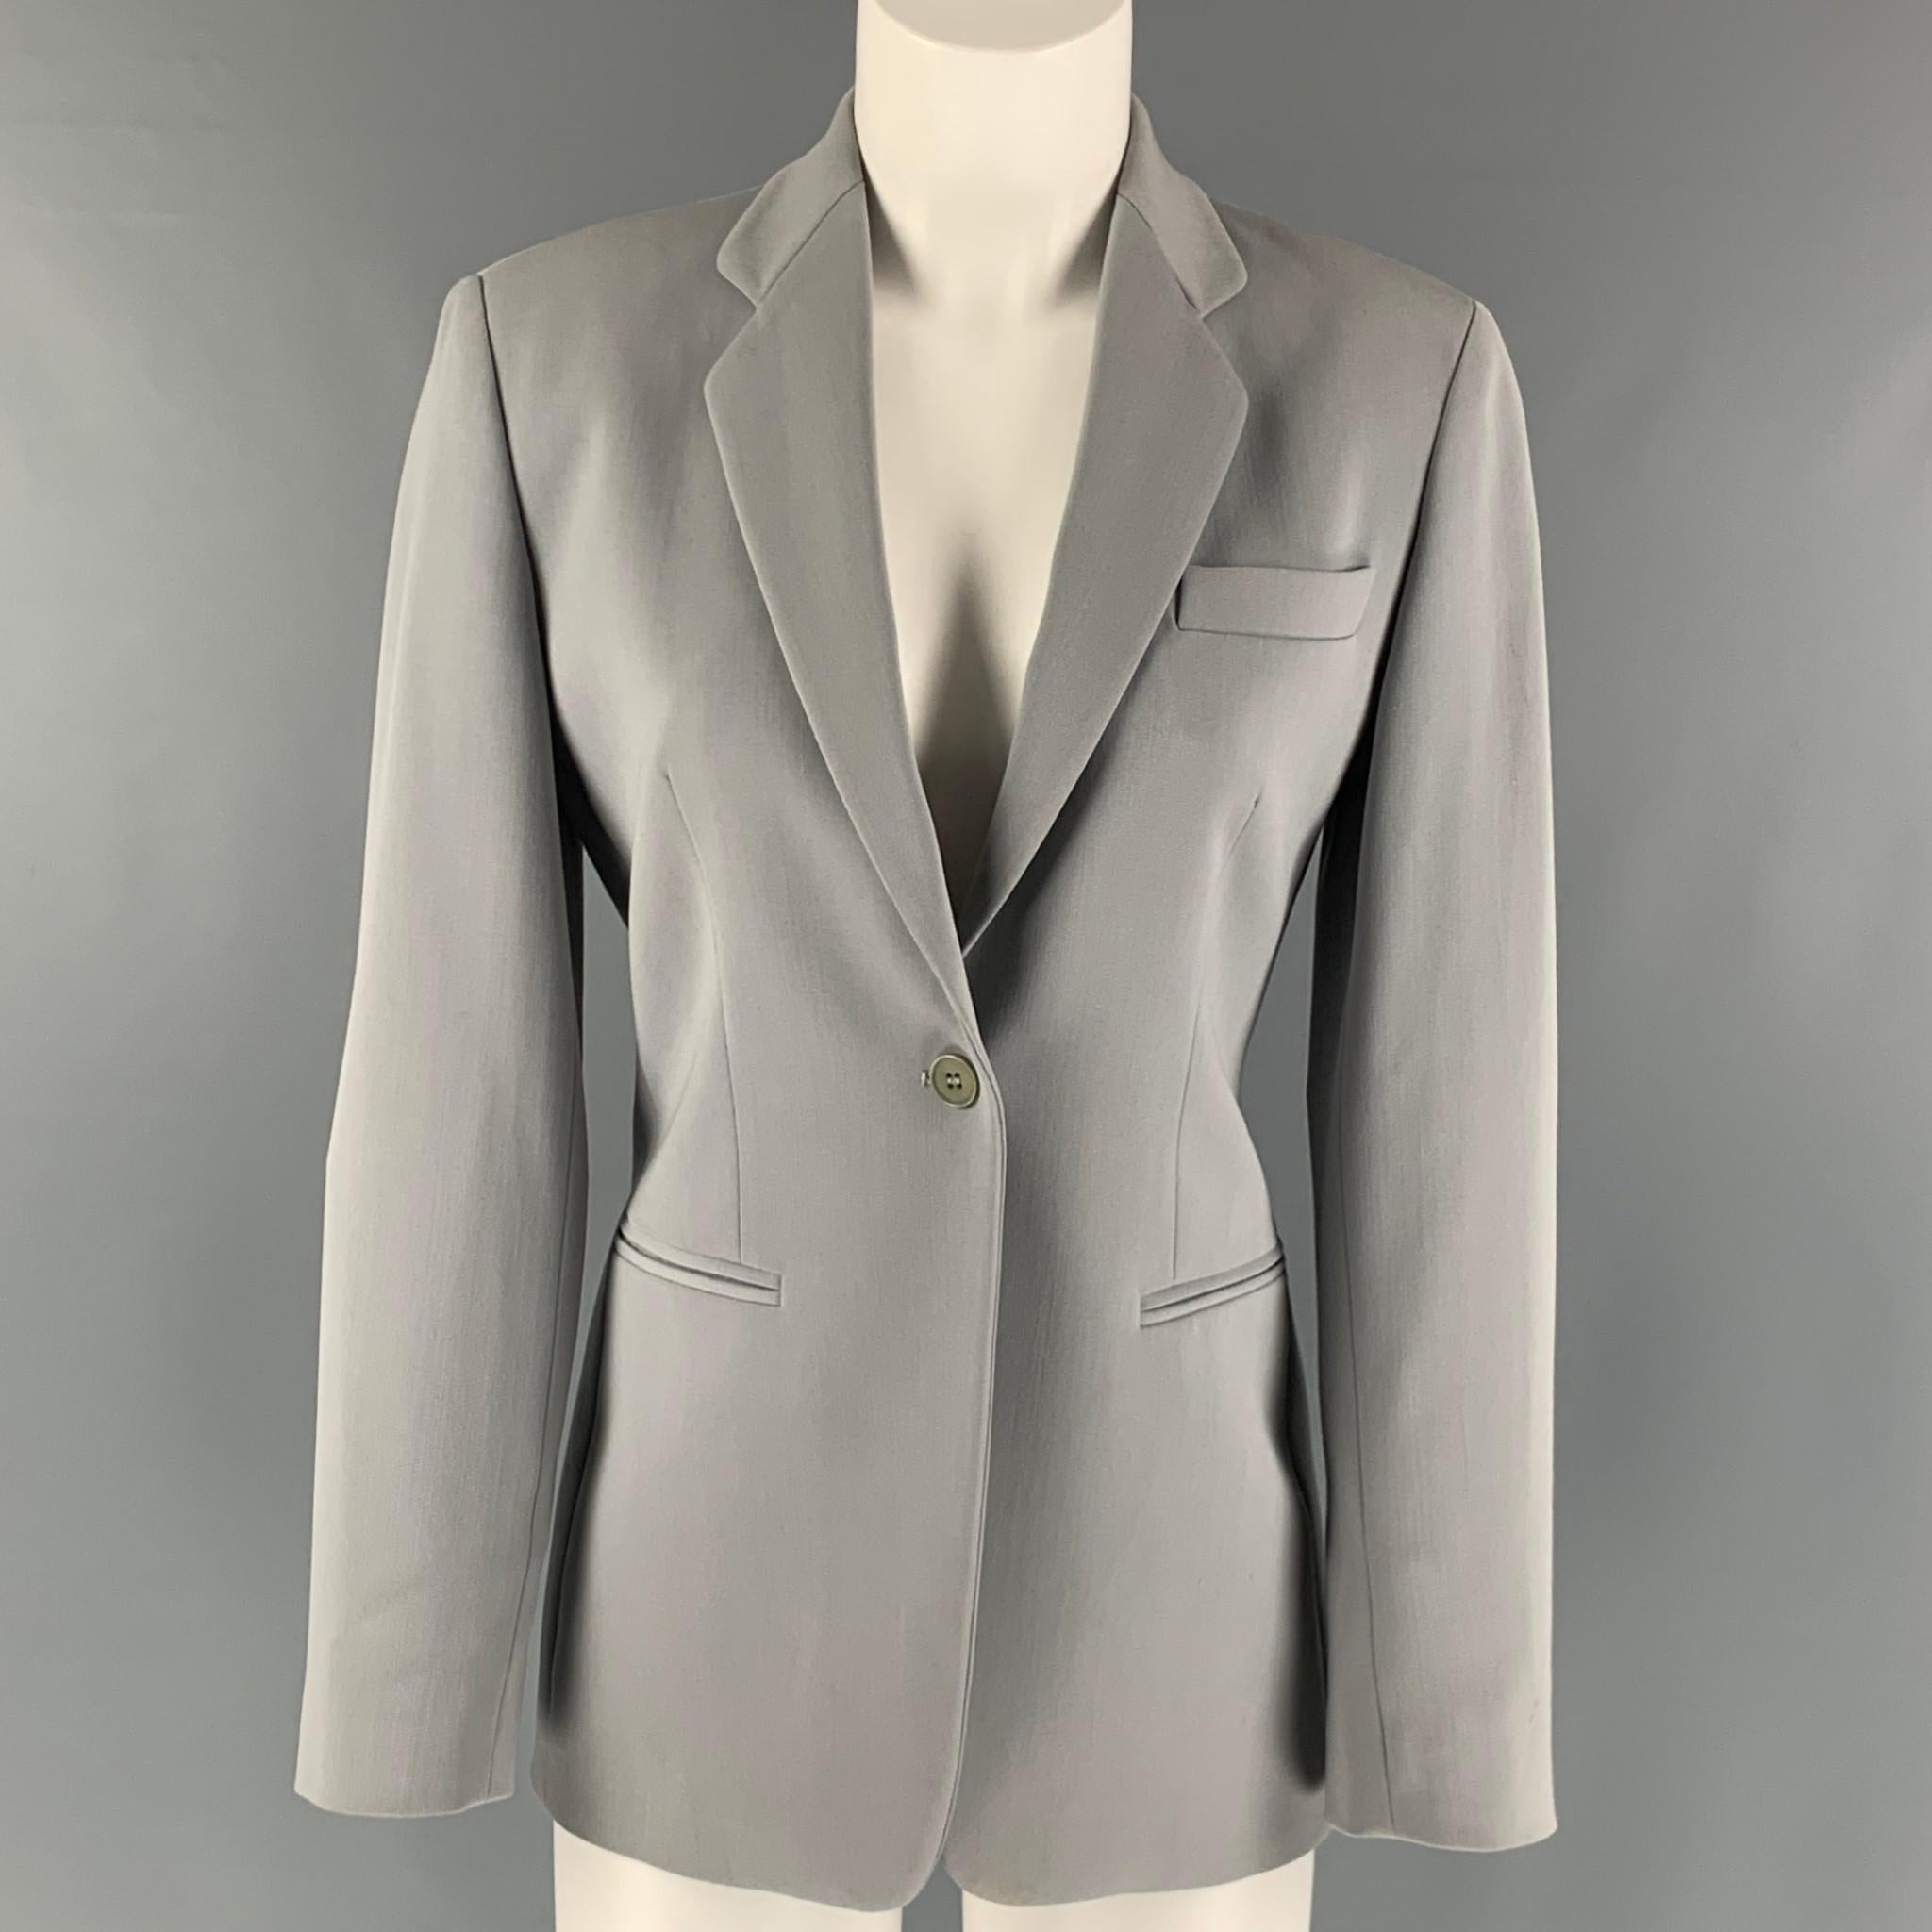 EMPORIO ARMANI blazer comes in a grey mint polyester woven material with a full liner featuring a notch lapel, welt pockets, and a button closure. Made in Italy.

Very Good Pre-Owned Condition.
Marked: 38

Measurements:

Shoulder: 16 in.
Bust: 36